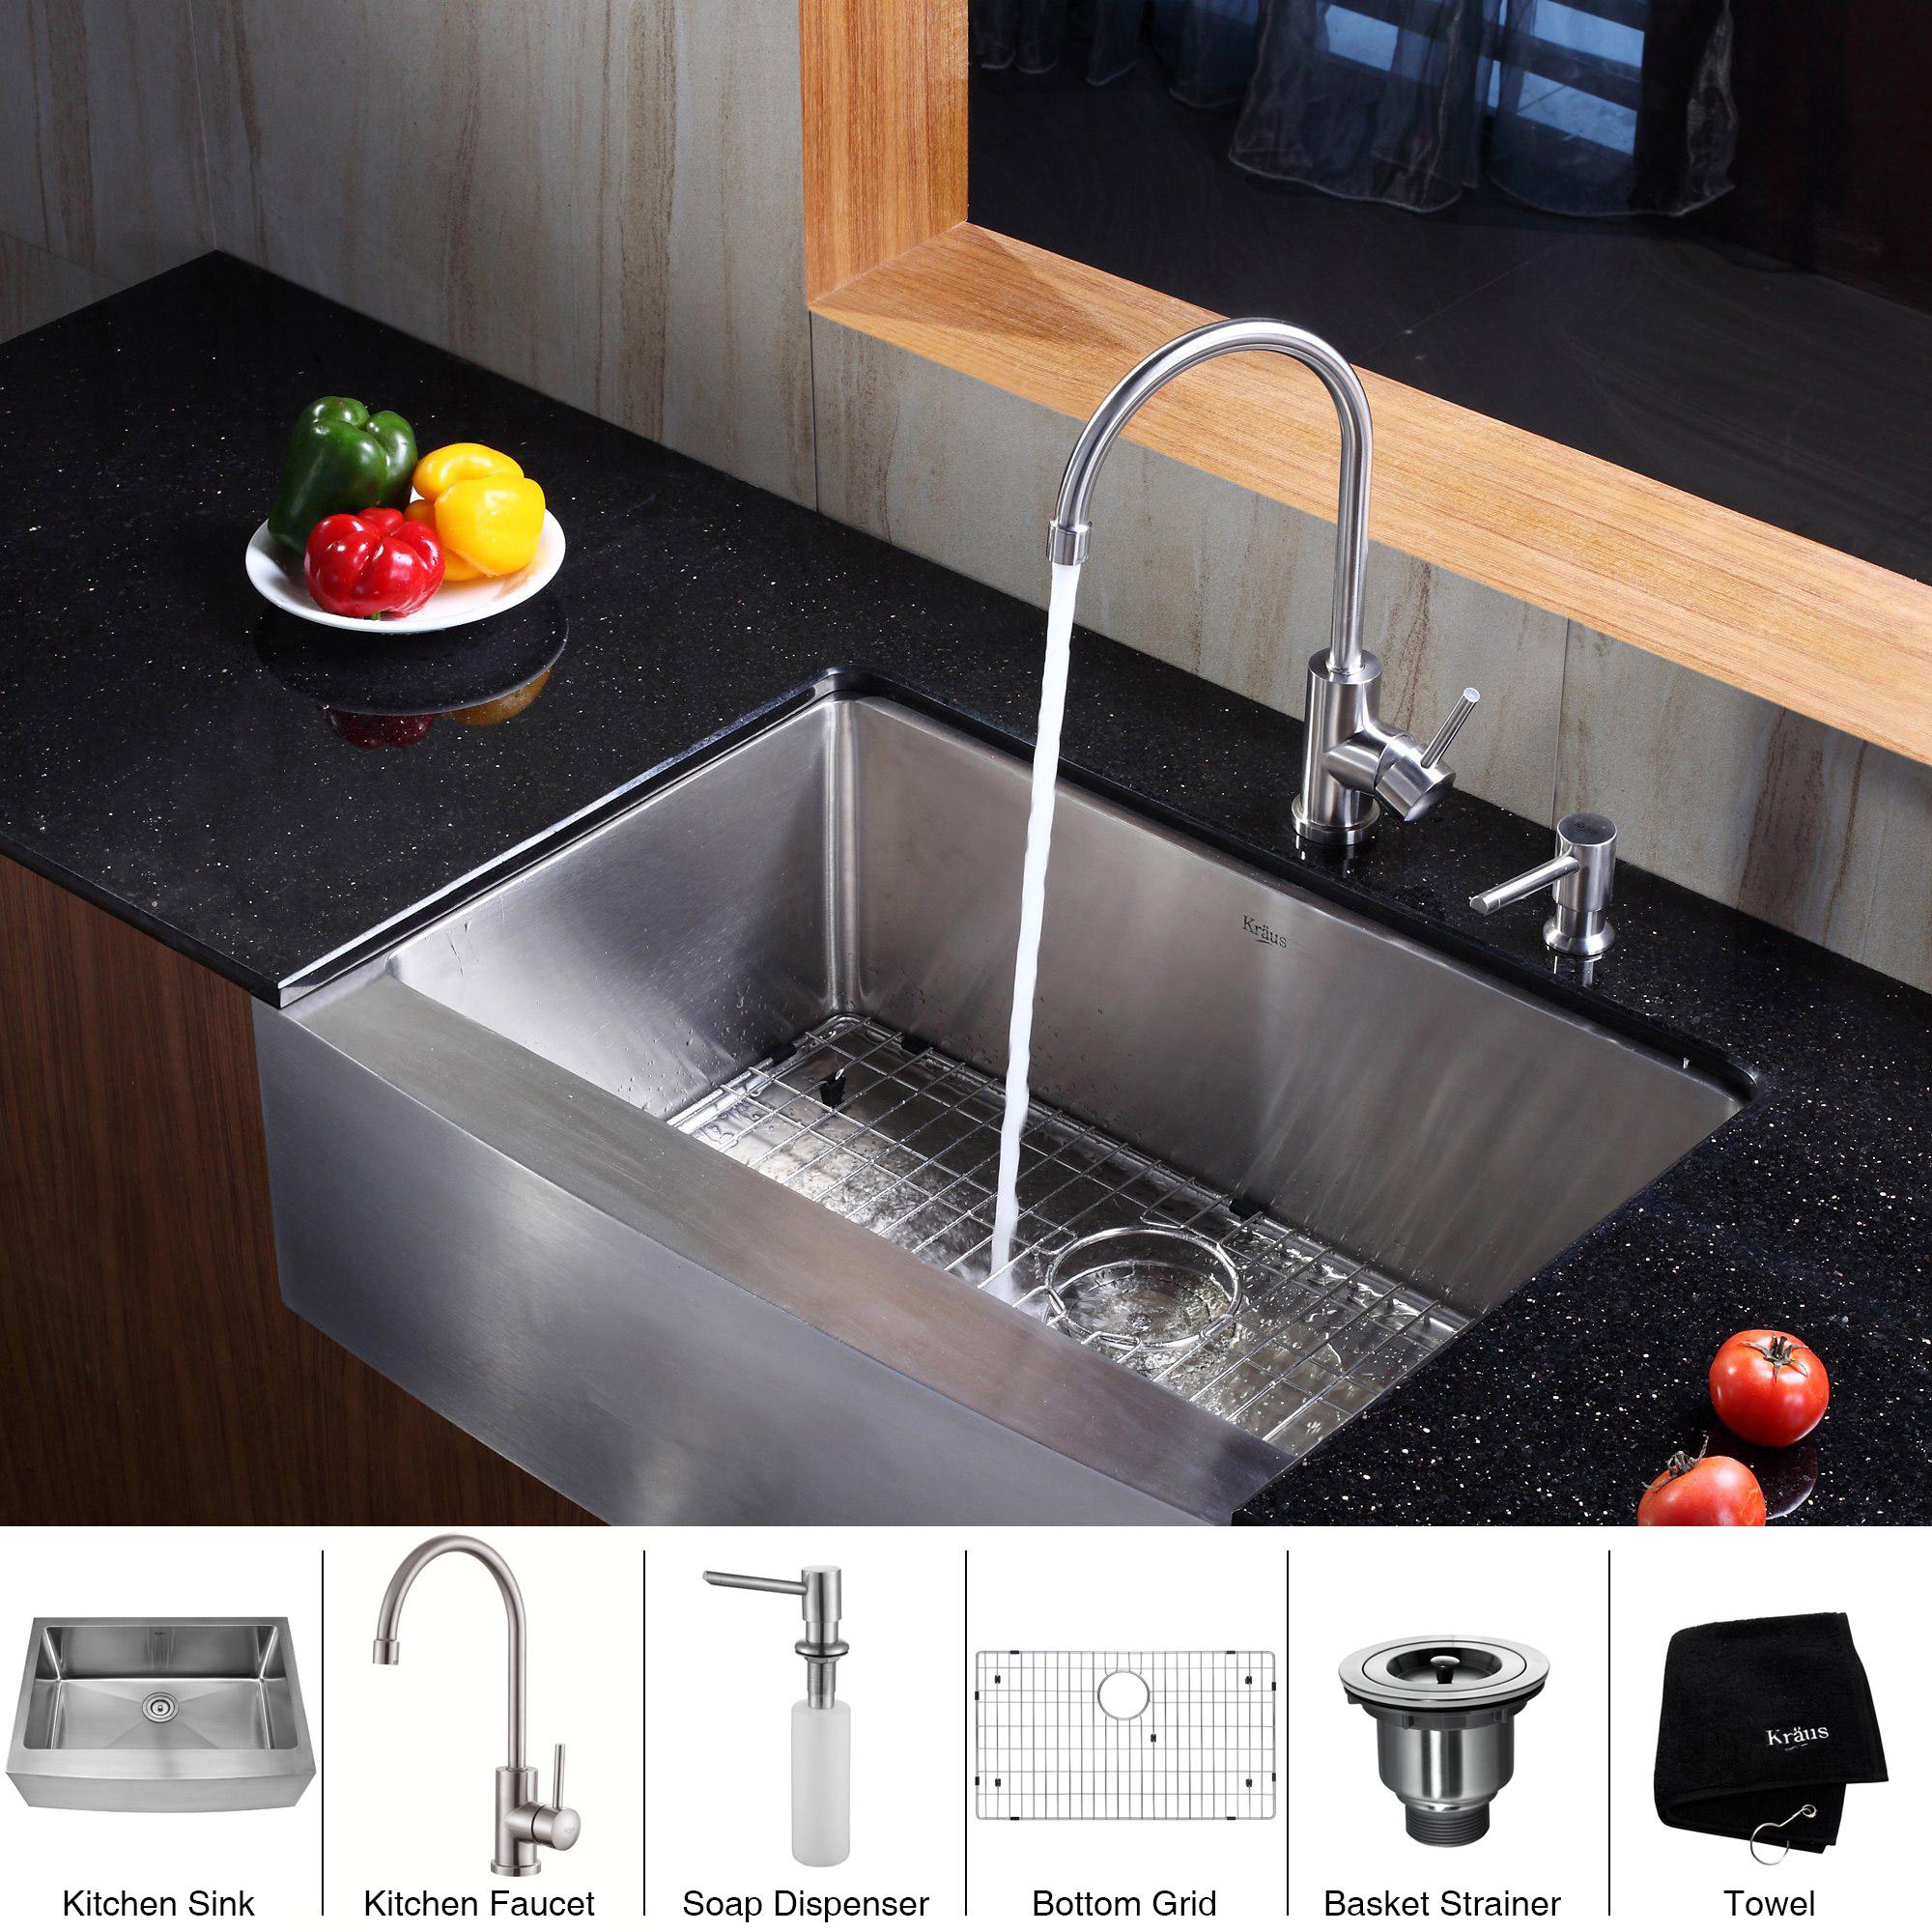 Kraus KHF20033KPF1602KSD30CH 33 Inch Farmhouse Single Bowl Stainless Steel  Sink with Spiral Spring Faucet, Soap Dispenser, 10 Inch Bowl Depth, Rear-Set  Drain and Scratch Resistant Satin Finish Sink